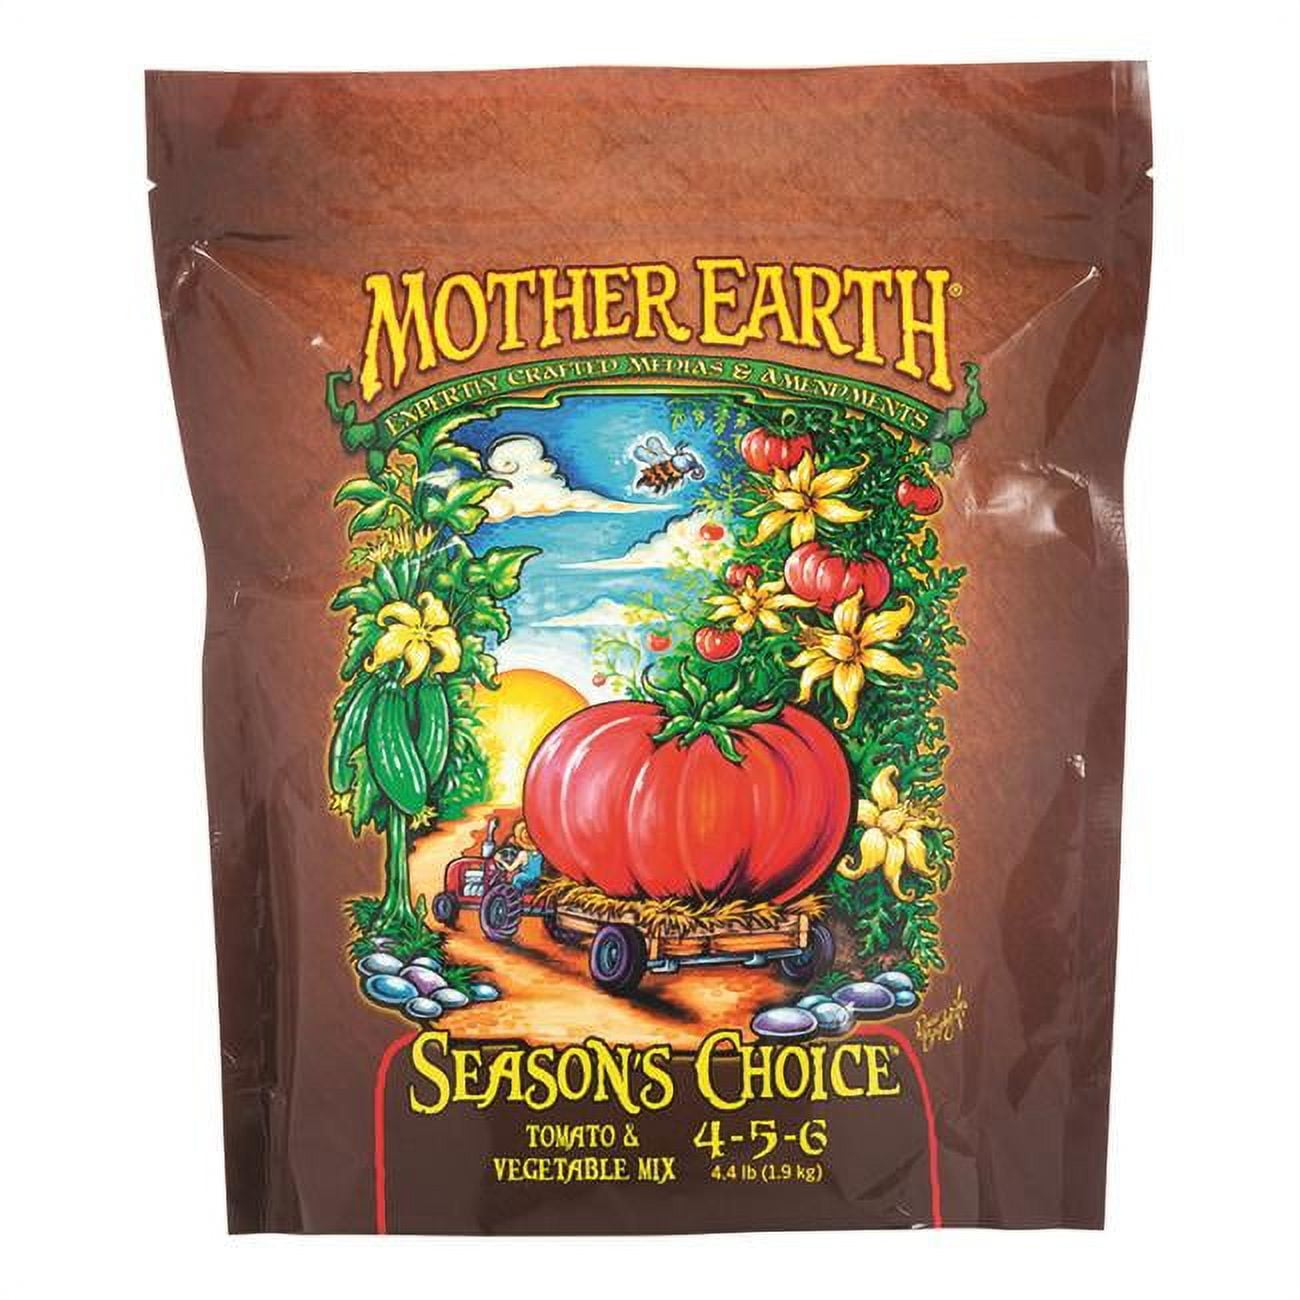 Picture of Mother Earth 7004434 4.4 lbs Seasons Choice Tomato & Vegetable Mix 4-5-6 Hydroponic Plant Nutrients